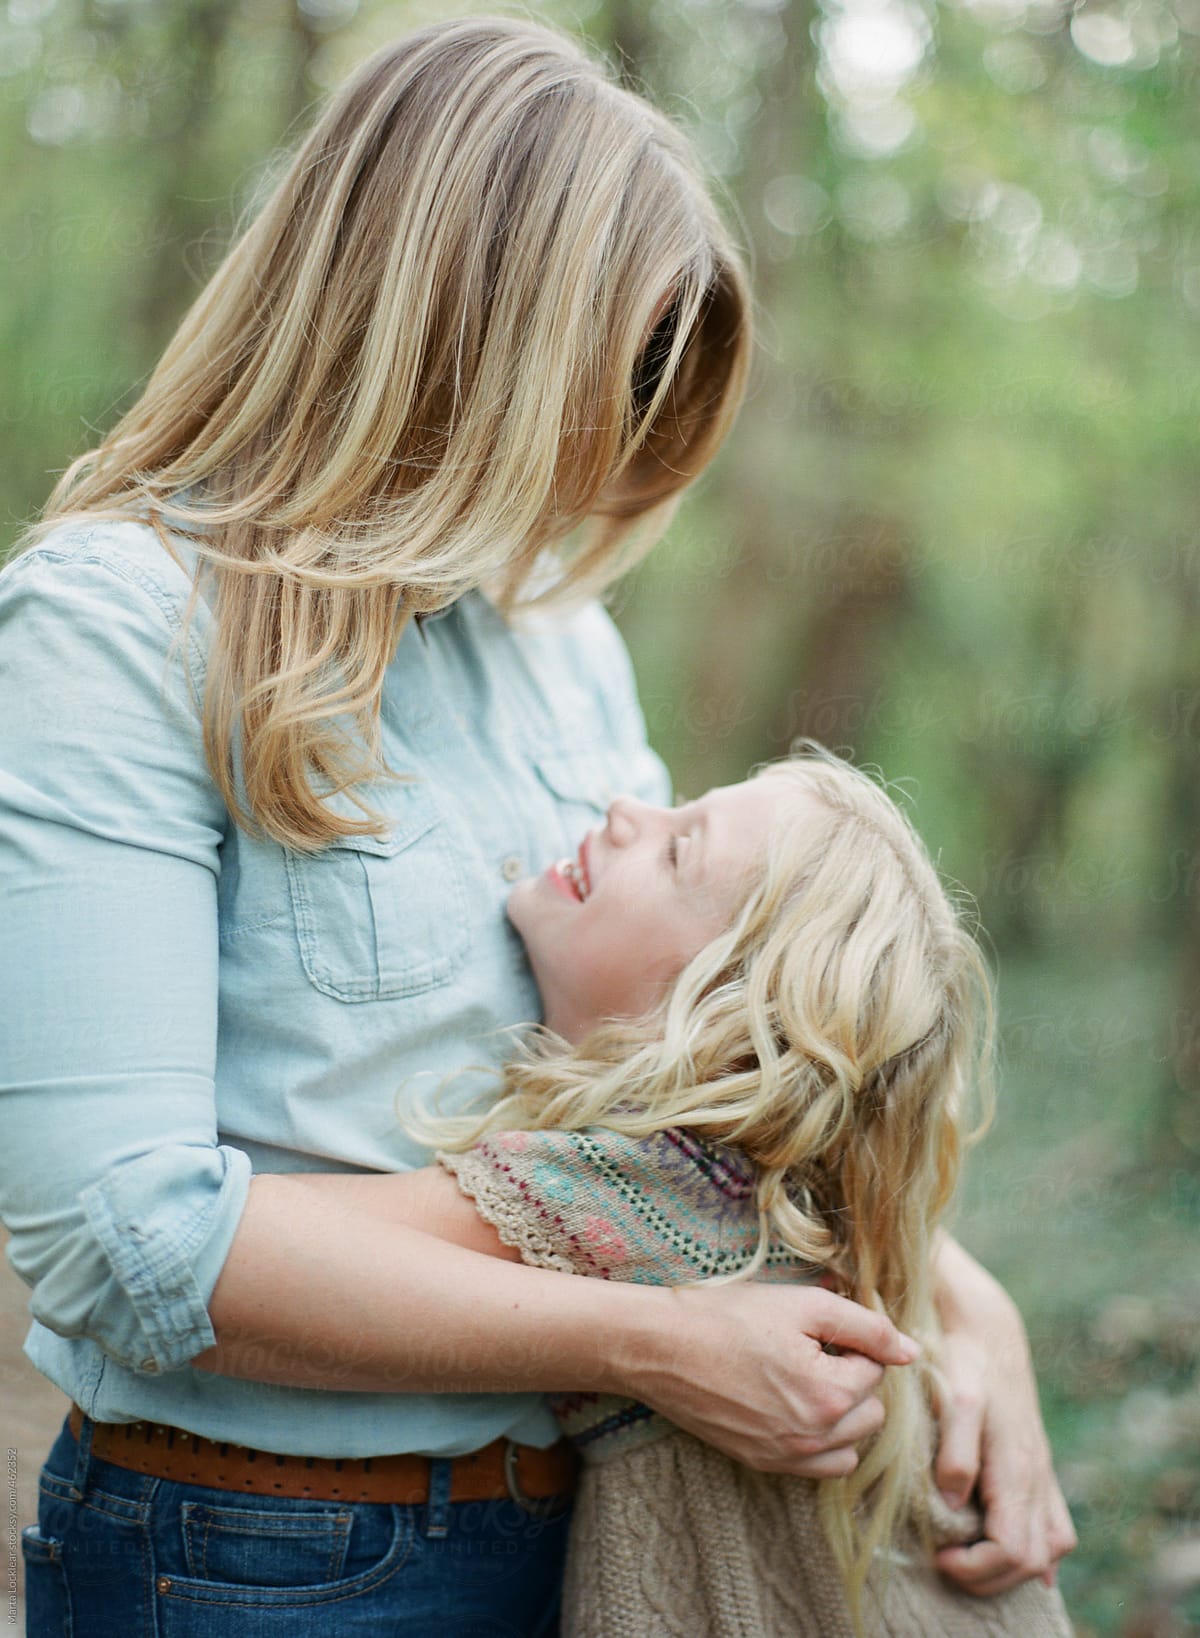 Daughter And Mother Hugging And Smiling By Stocksy Contributor Marta